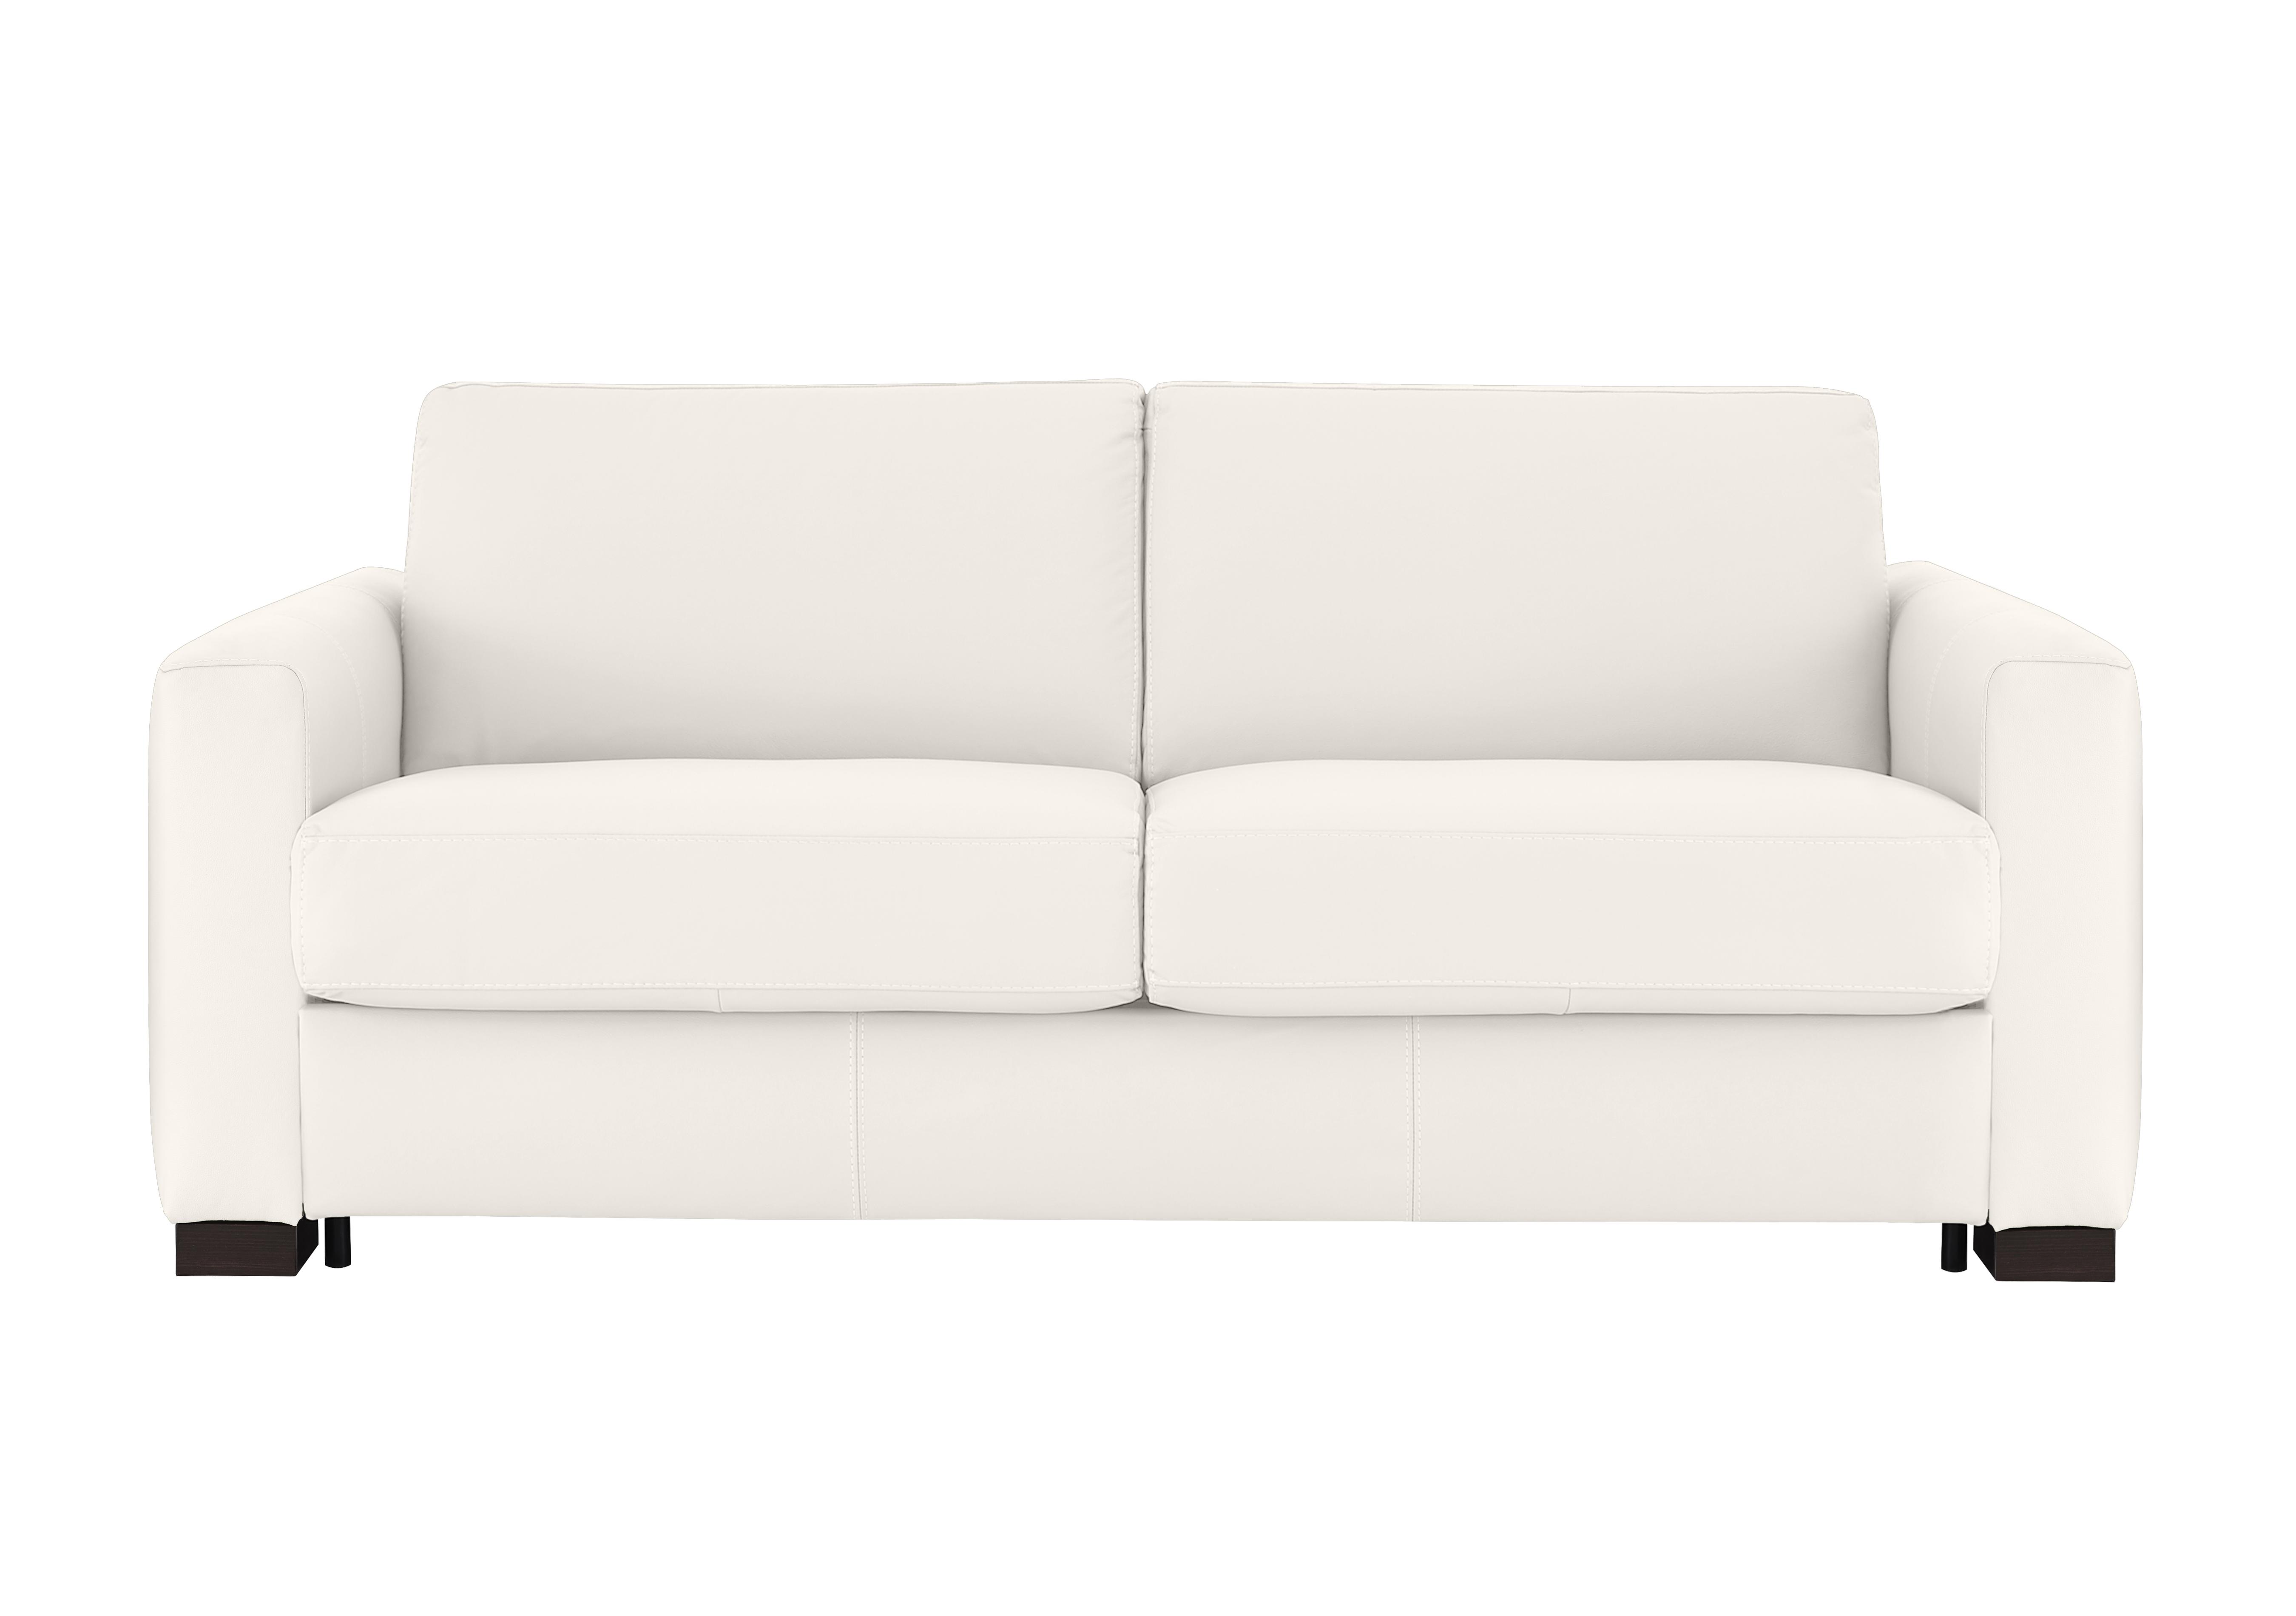 Alcova 3 Seater Leather Sofa Bed with Box Arms in Torello Bianco 93 on Furniture Village